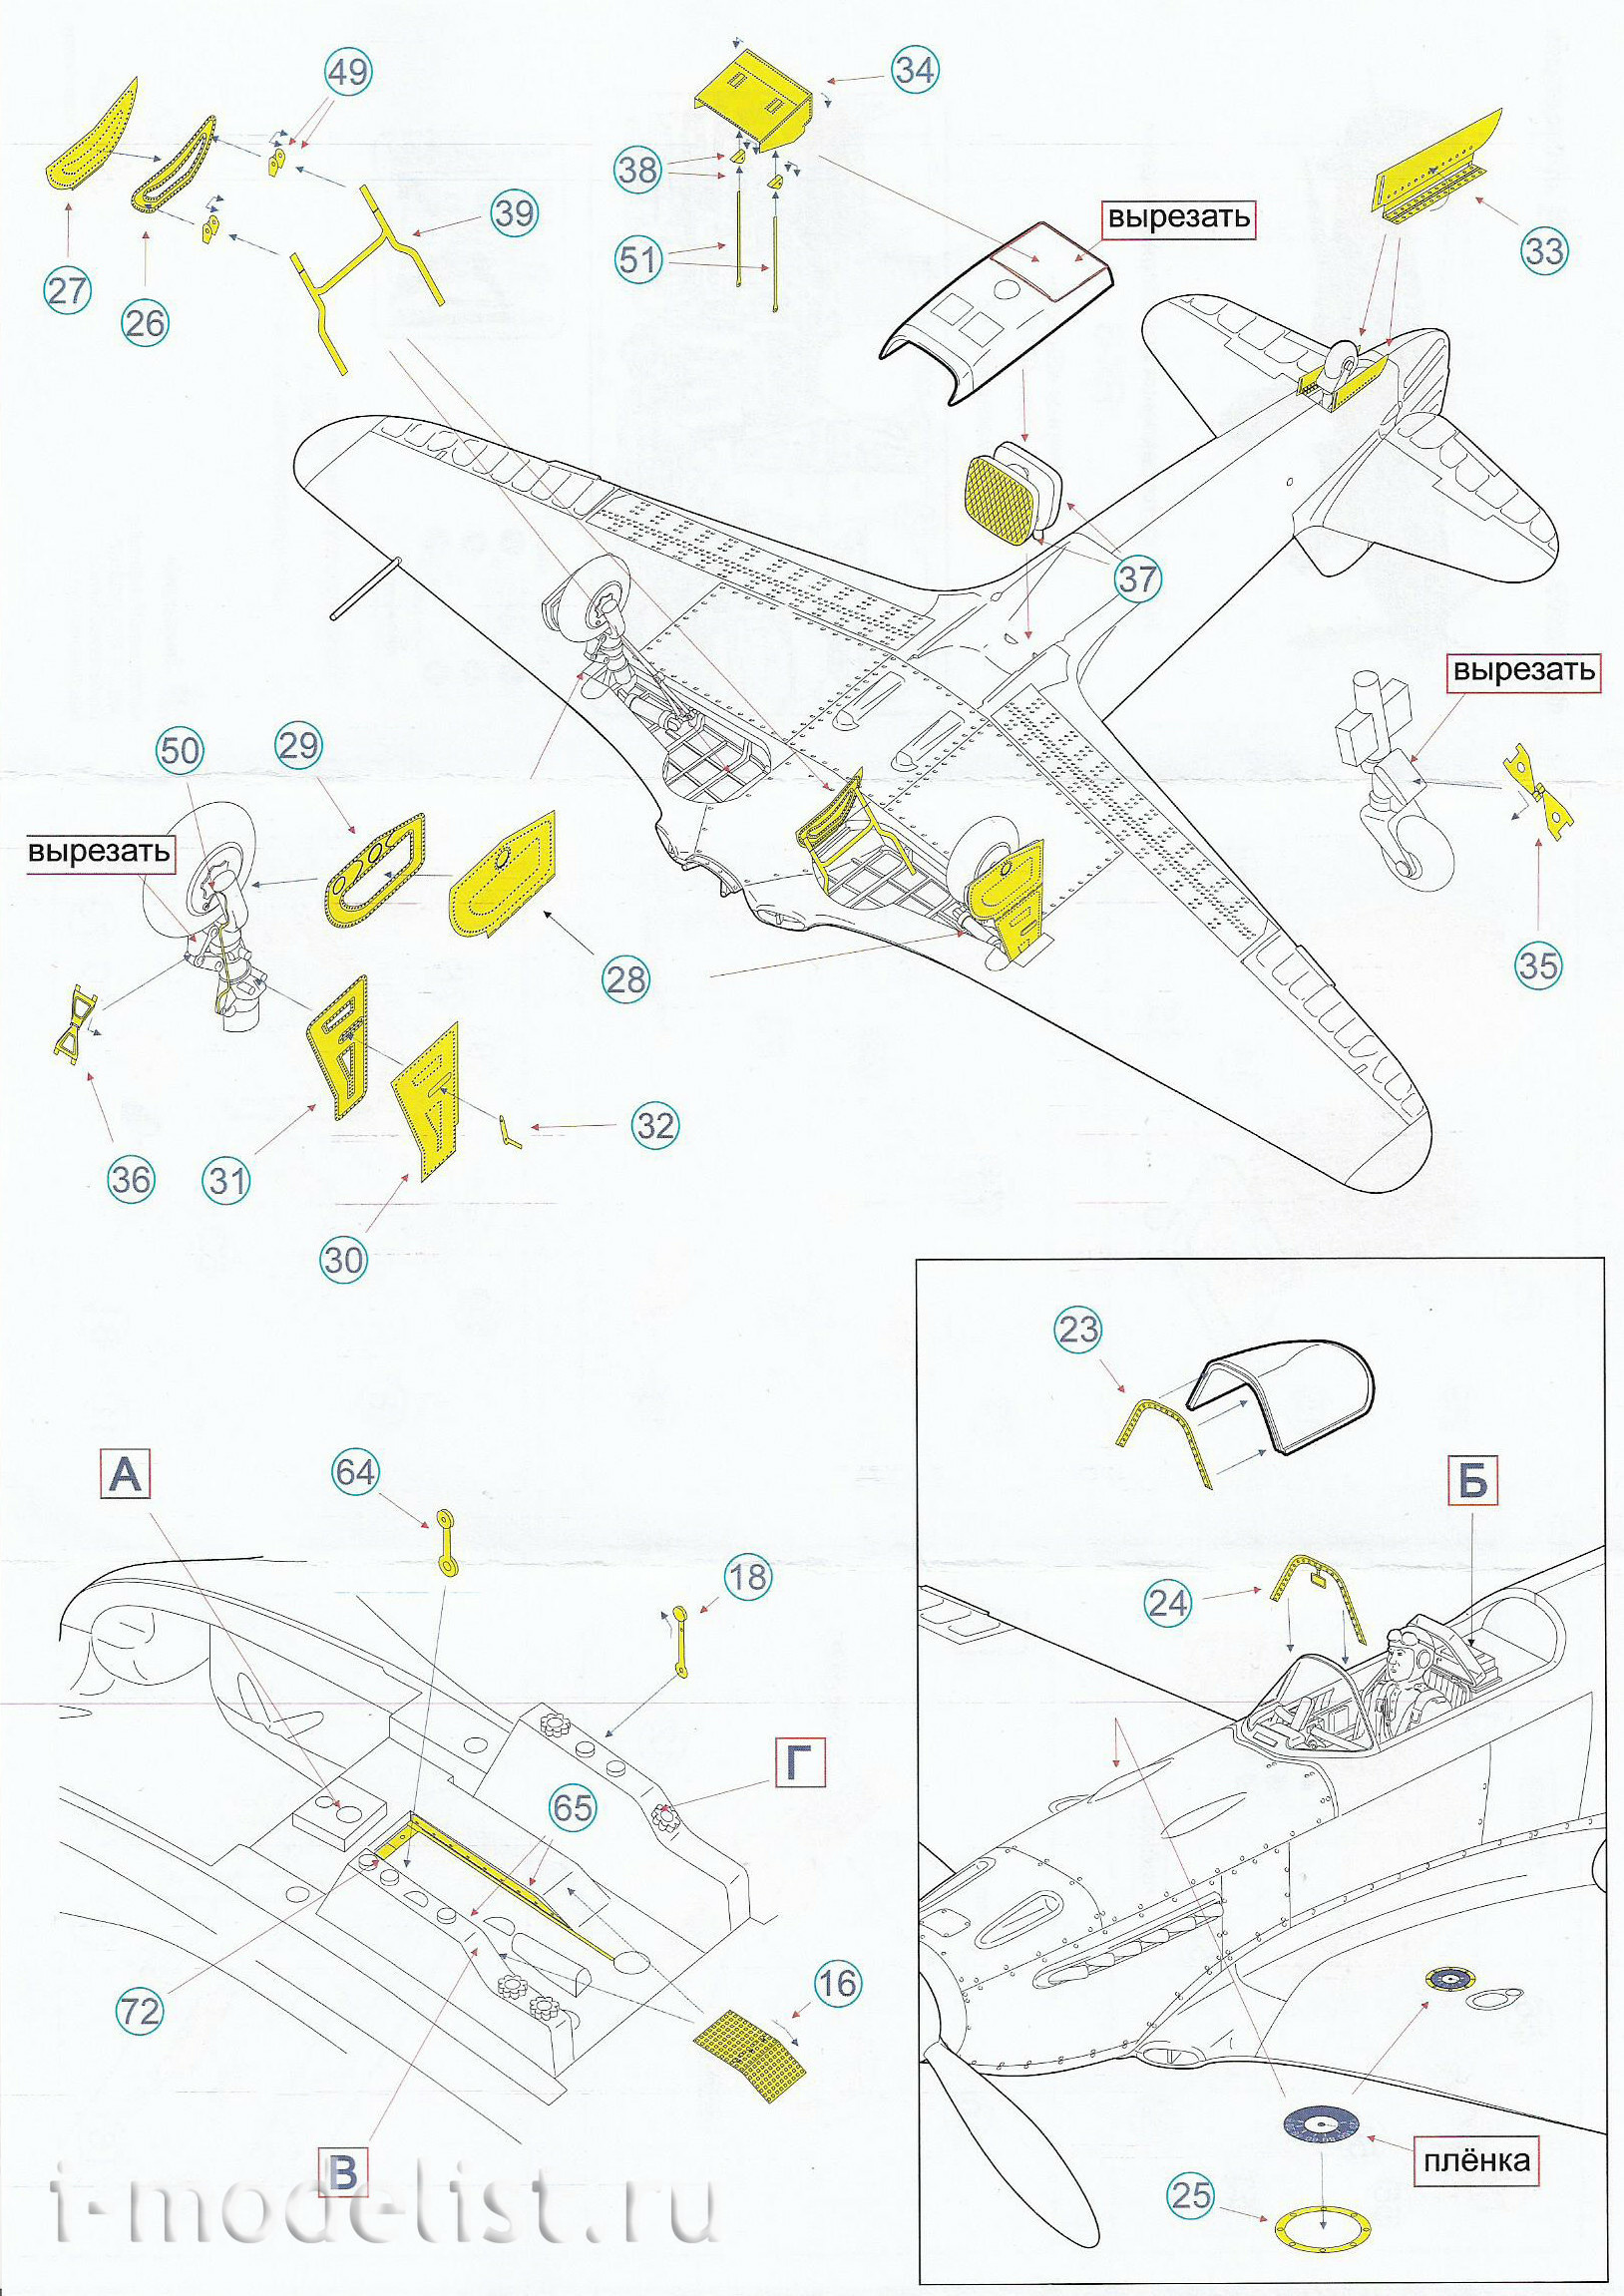 048203 Microdesign photo etched parts for 1/48 Yakovlev-3 from the Zvezda